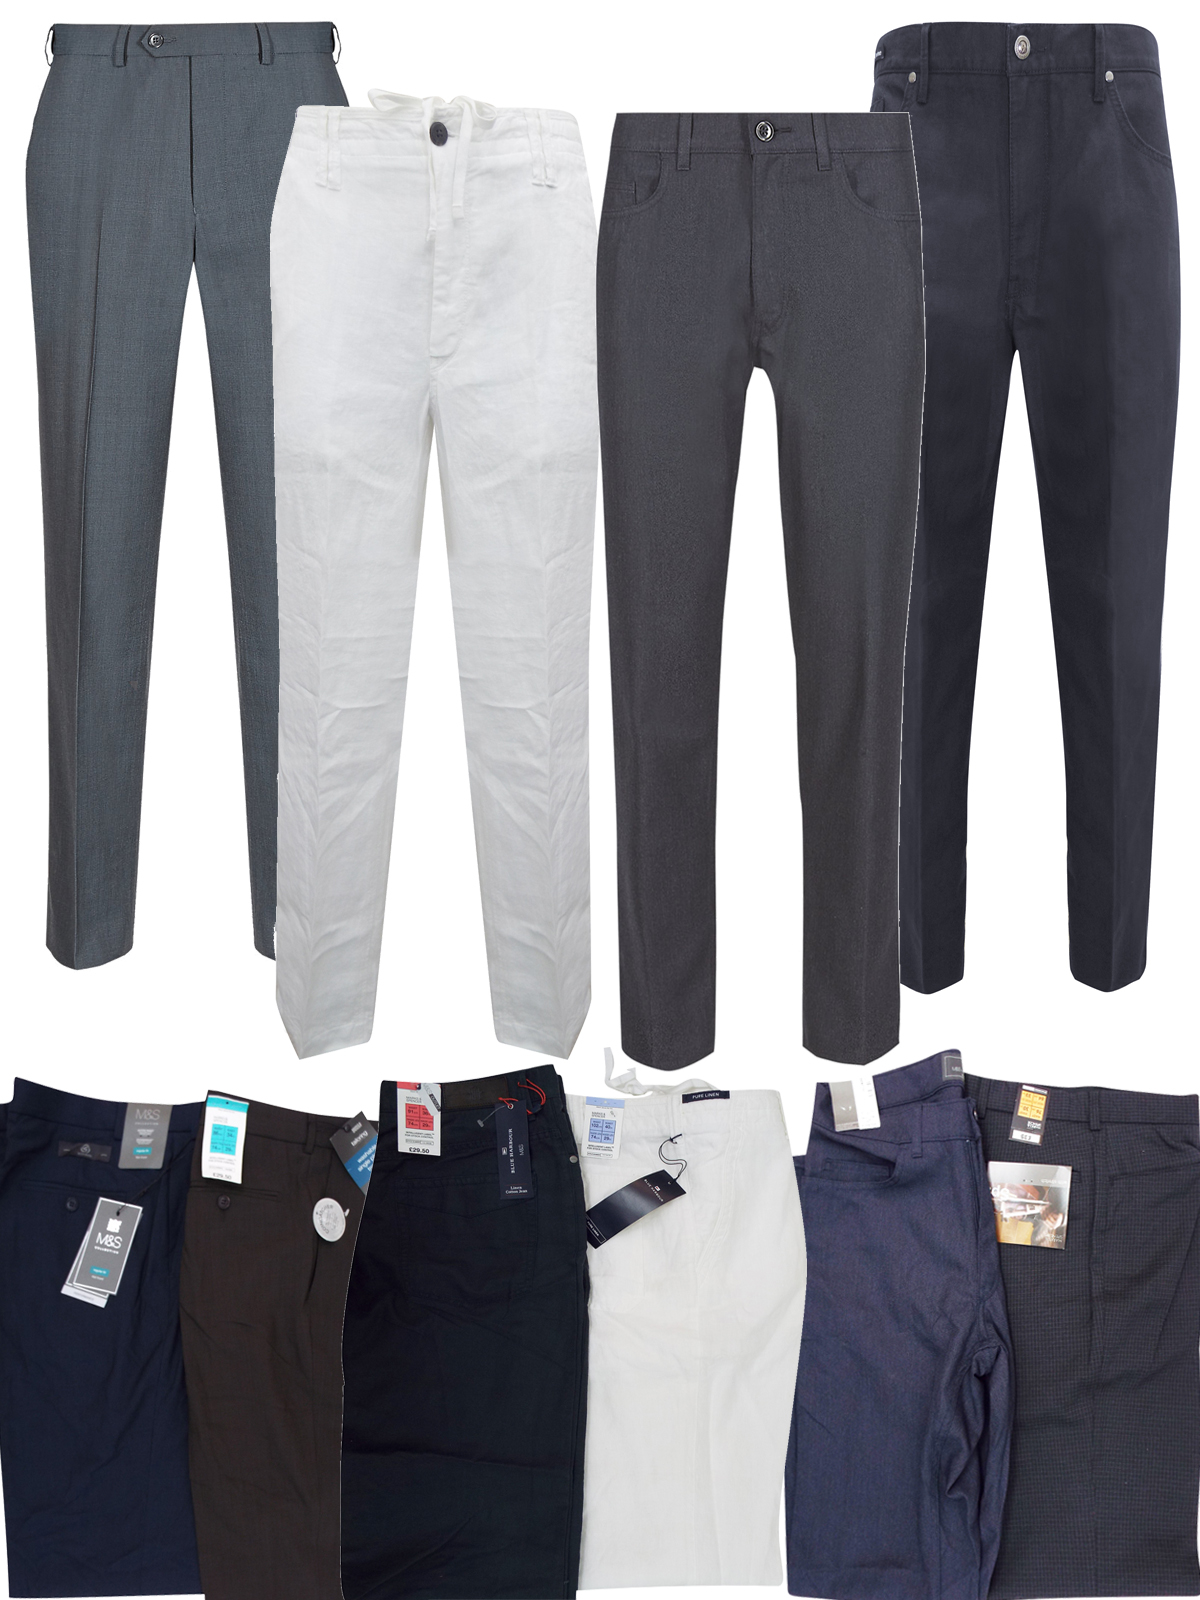 Marks and Spencer - - M&5 ASSORTED Mens Trousers - Waist Size 34 to 42 ...